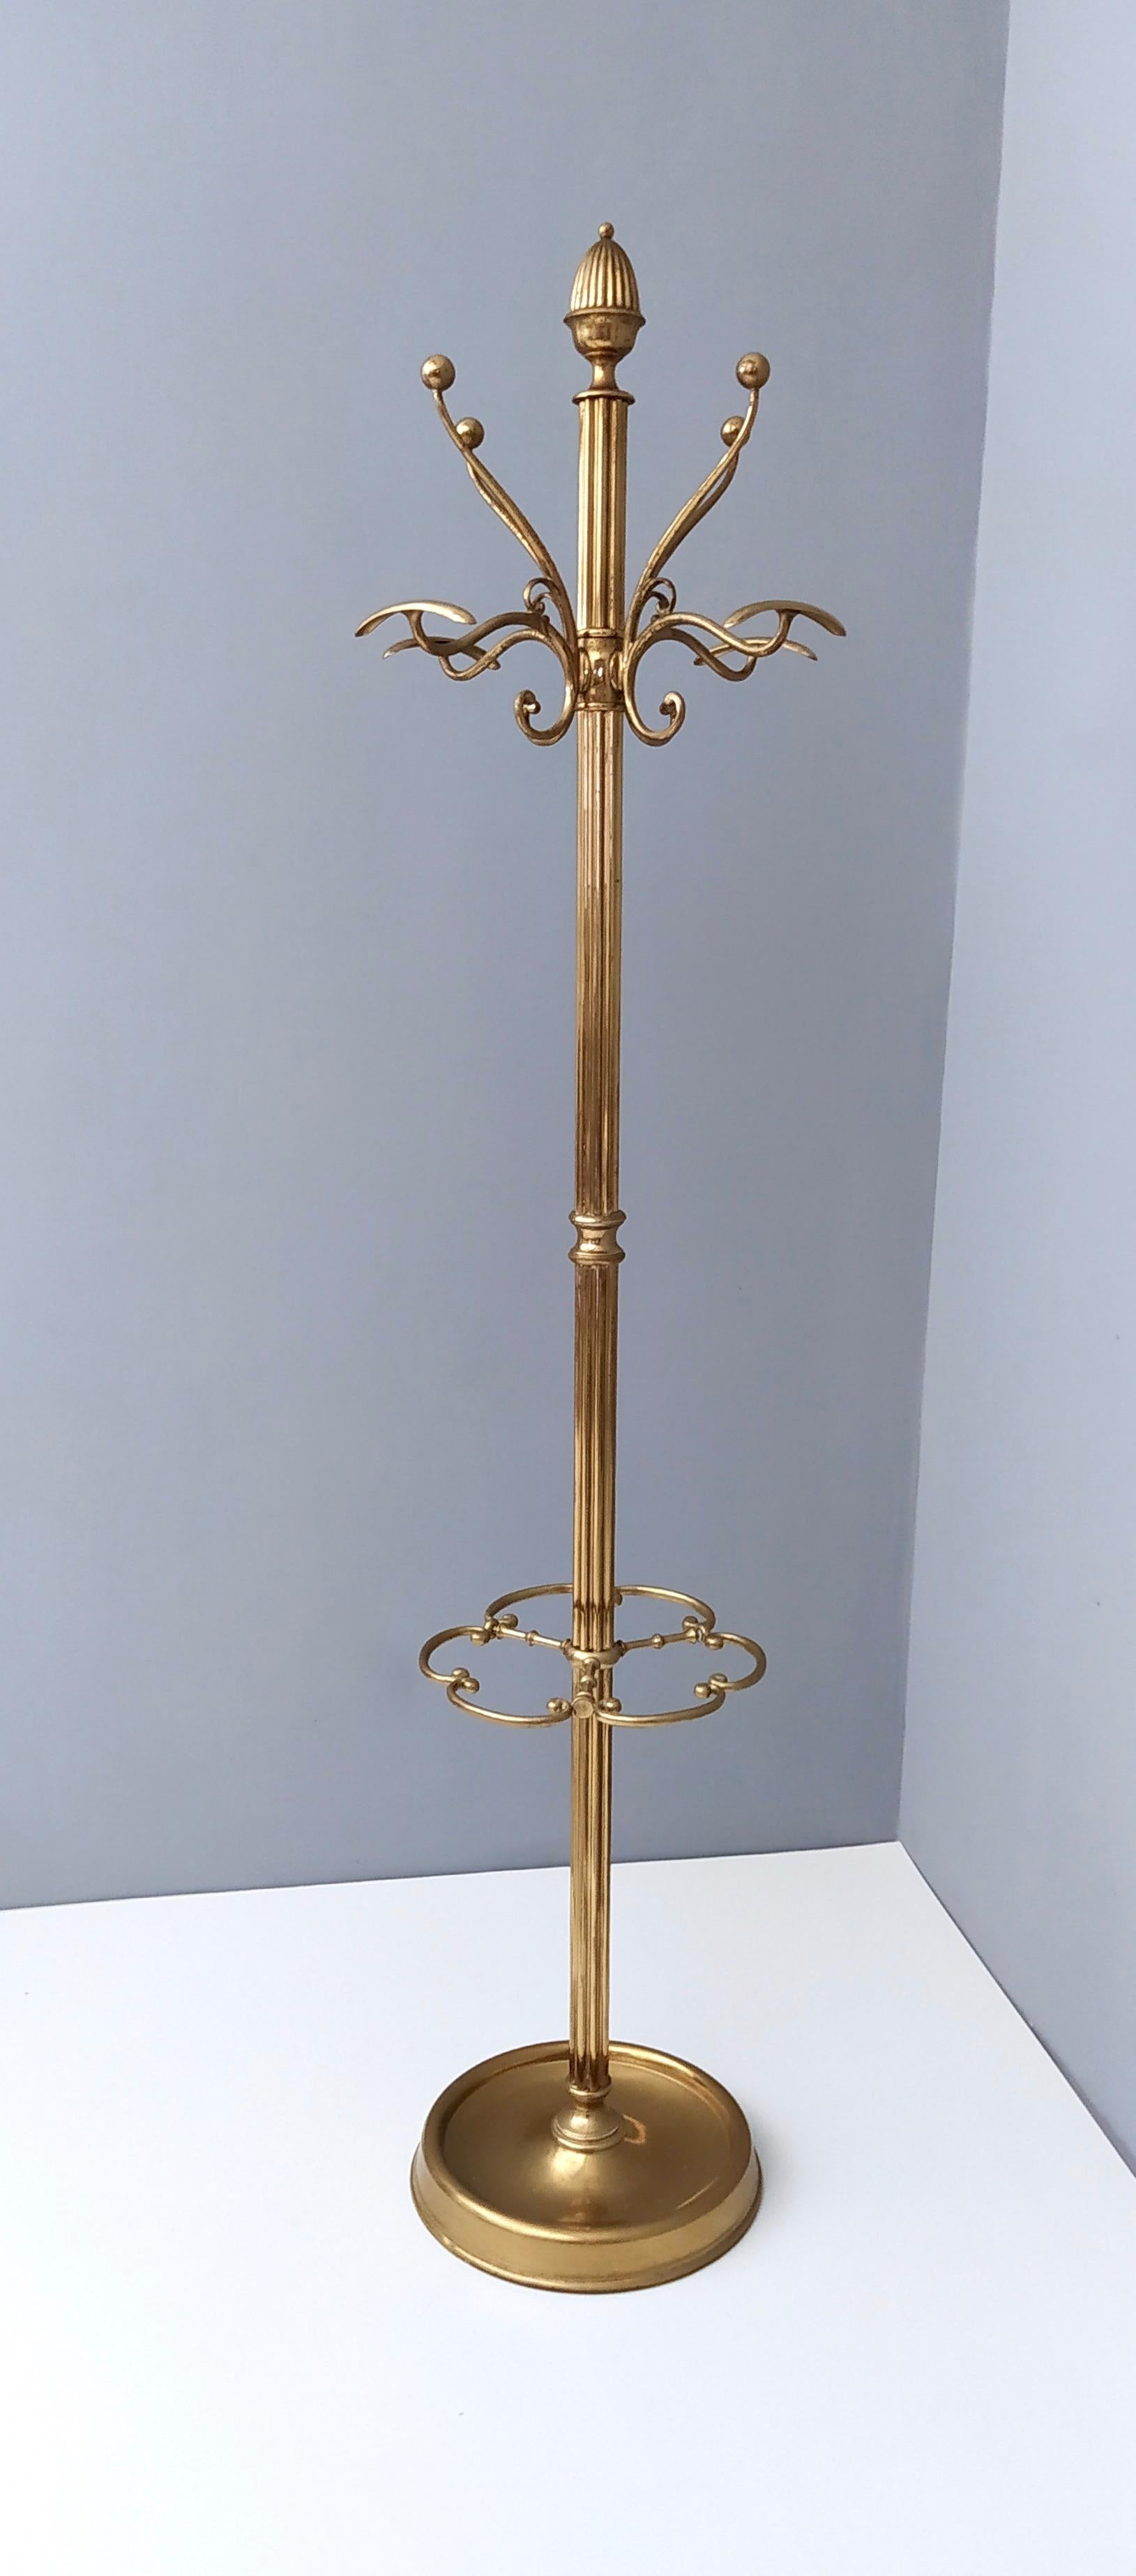 Mid-Century Modern High-Quality Brass Hat and Coat Rack Ascribable to Piero Fornasetti, Italy 1960s